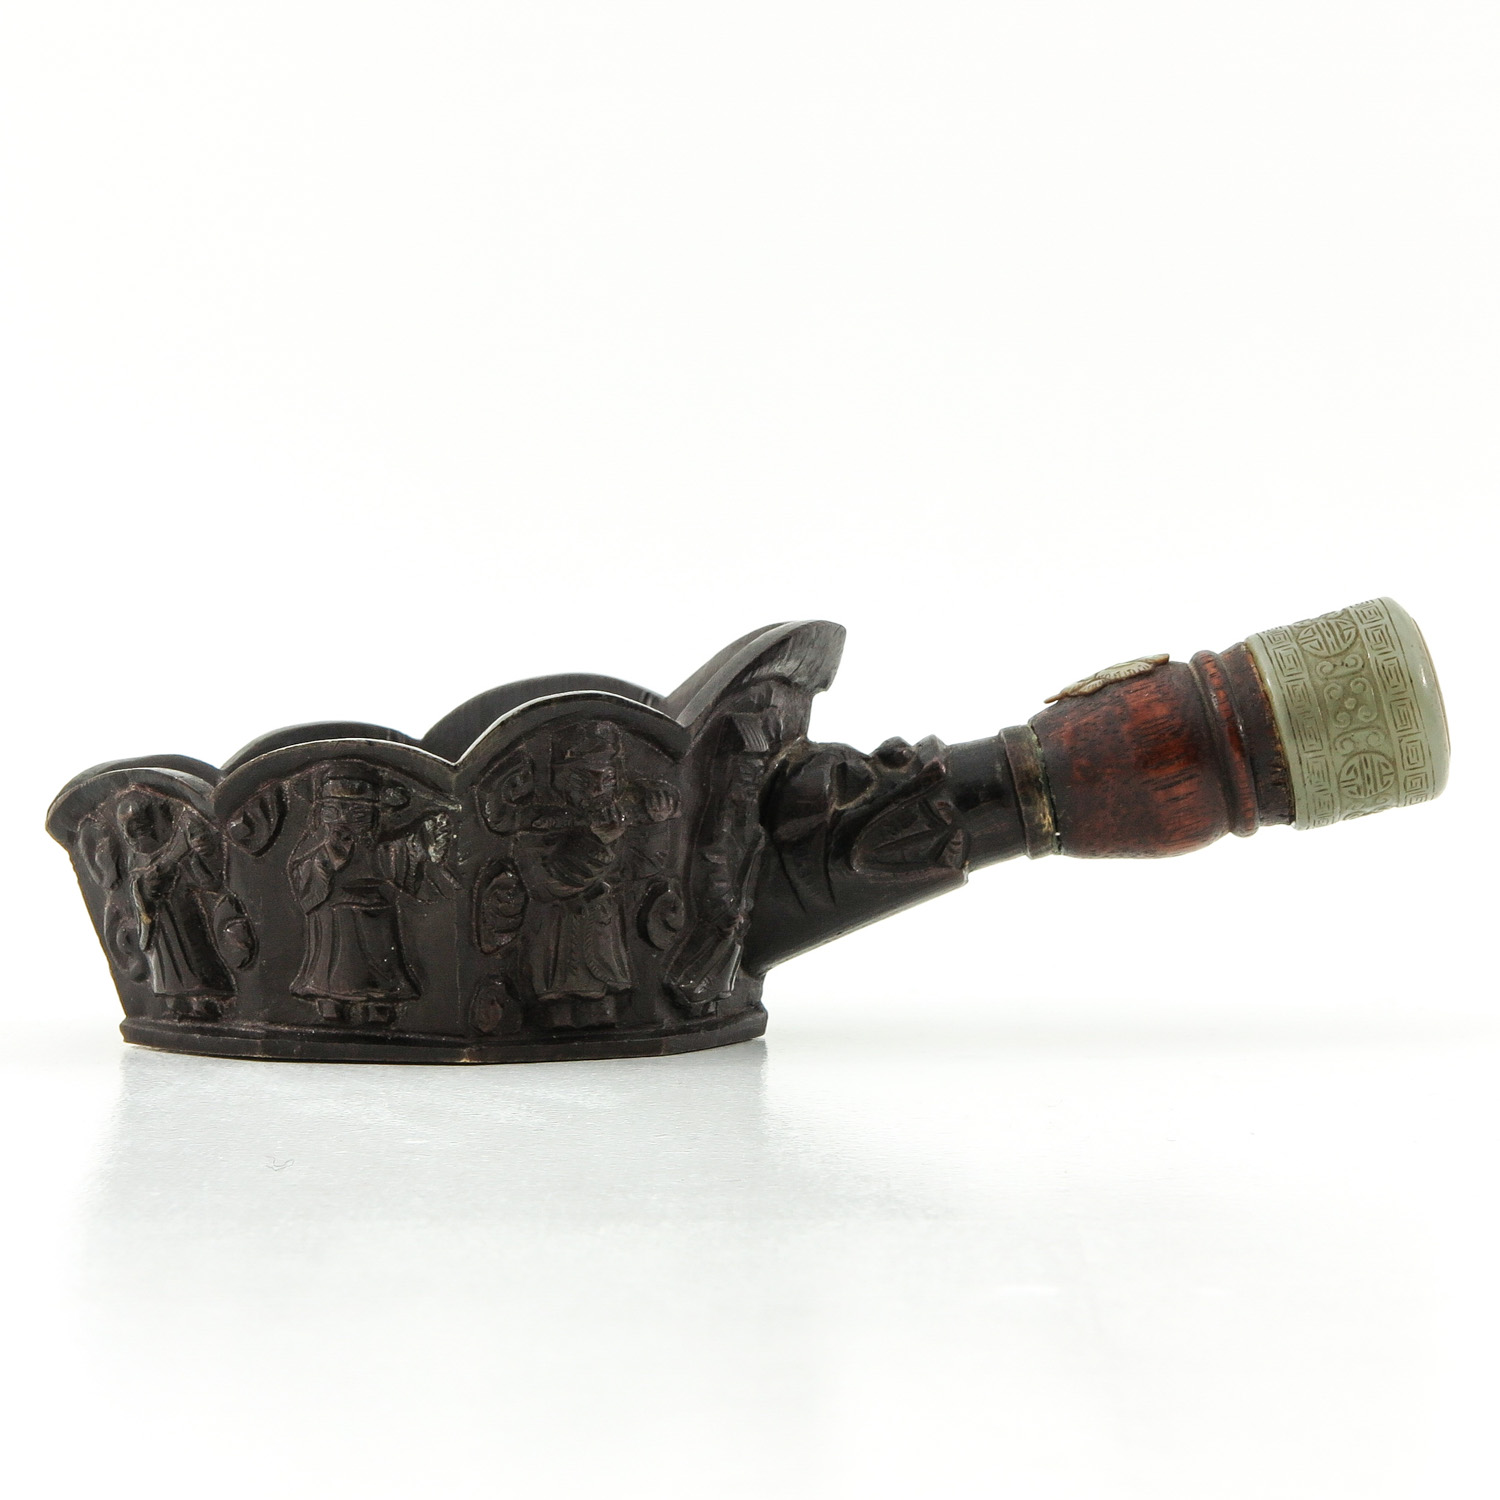 A Bronze Chinese Iron with Jade Handle - Image 4 of 10